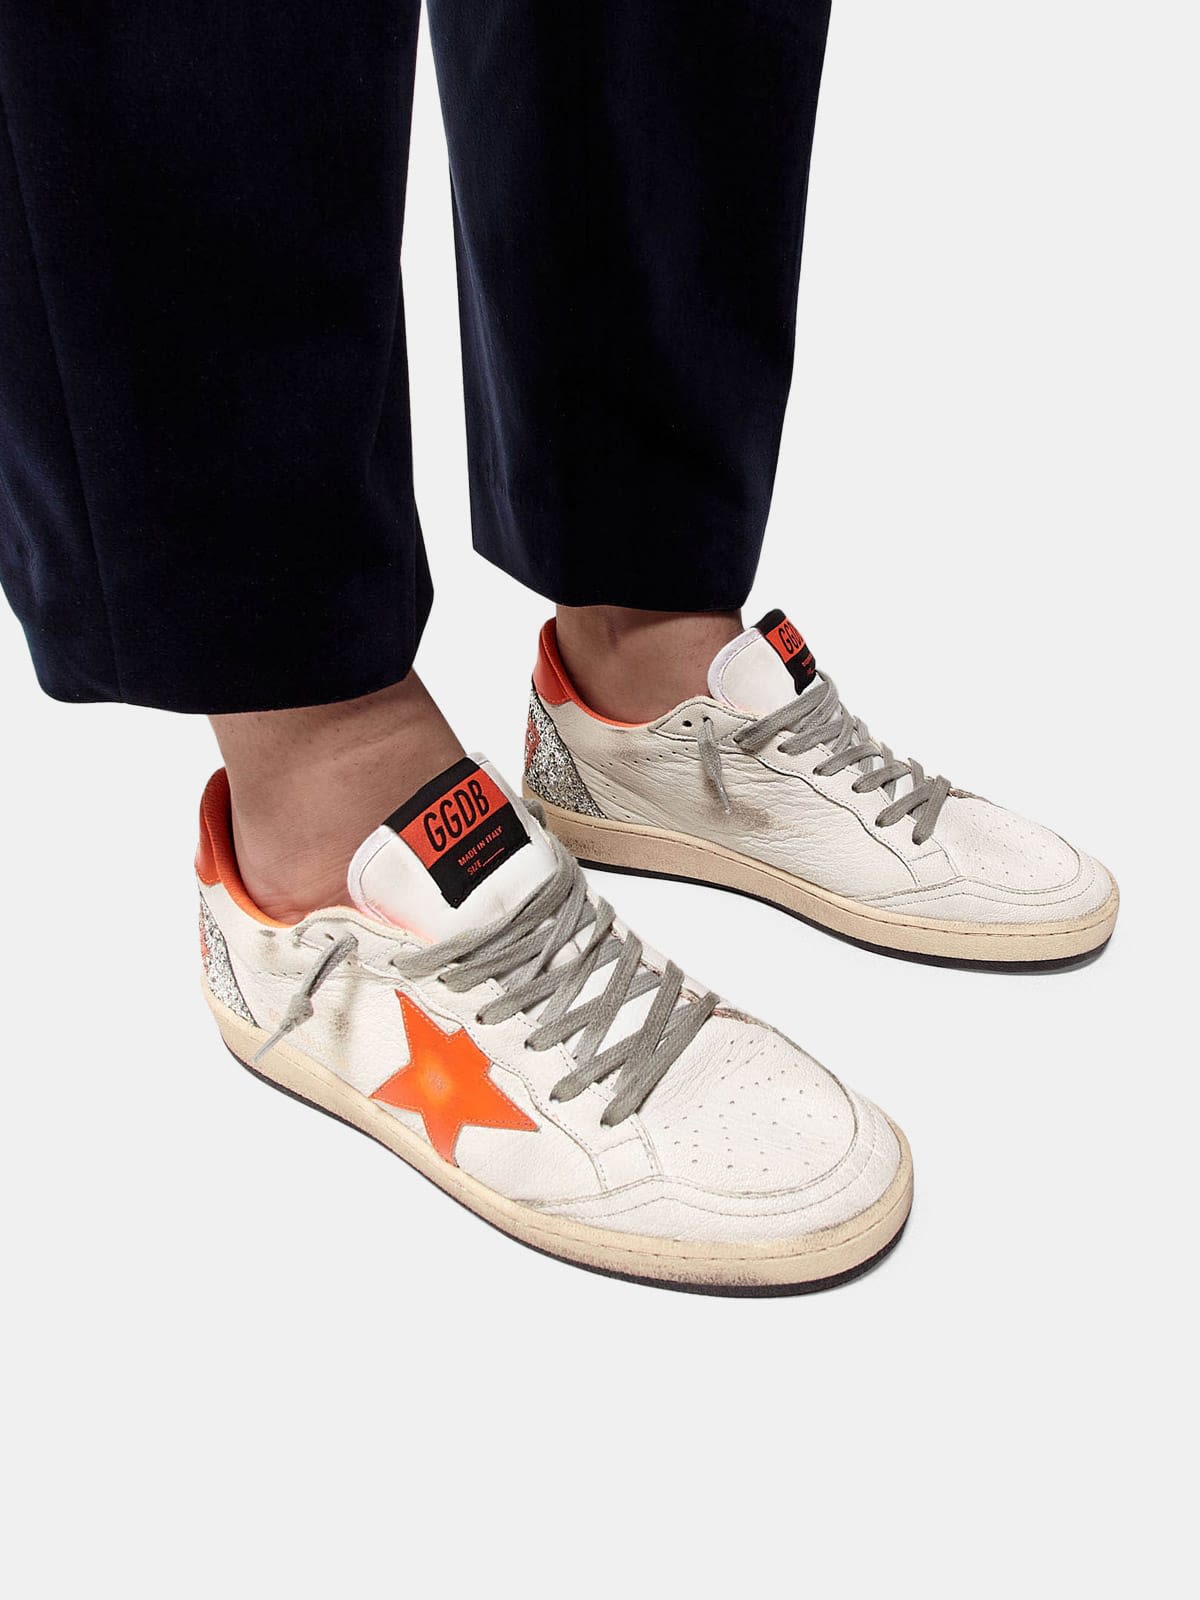 Ball Star sneakers with fluorescent details and glittery back